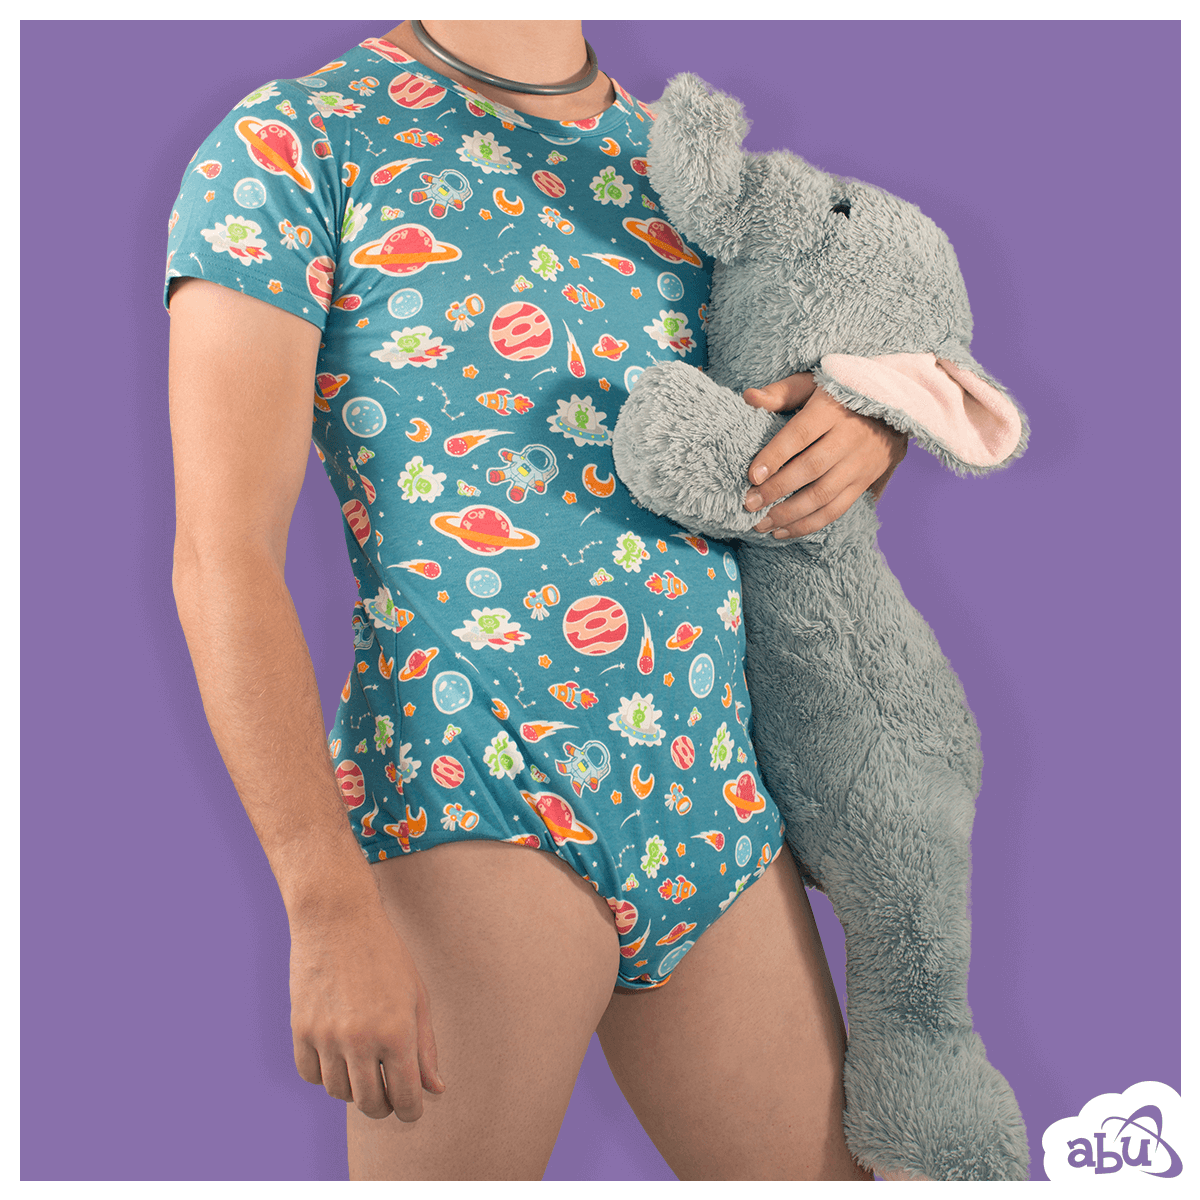 Diapersuit™ Patterned Abuniverse Europe